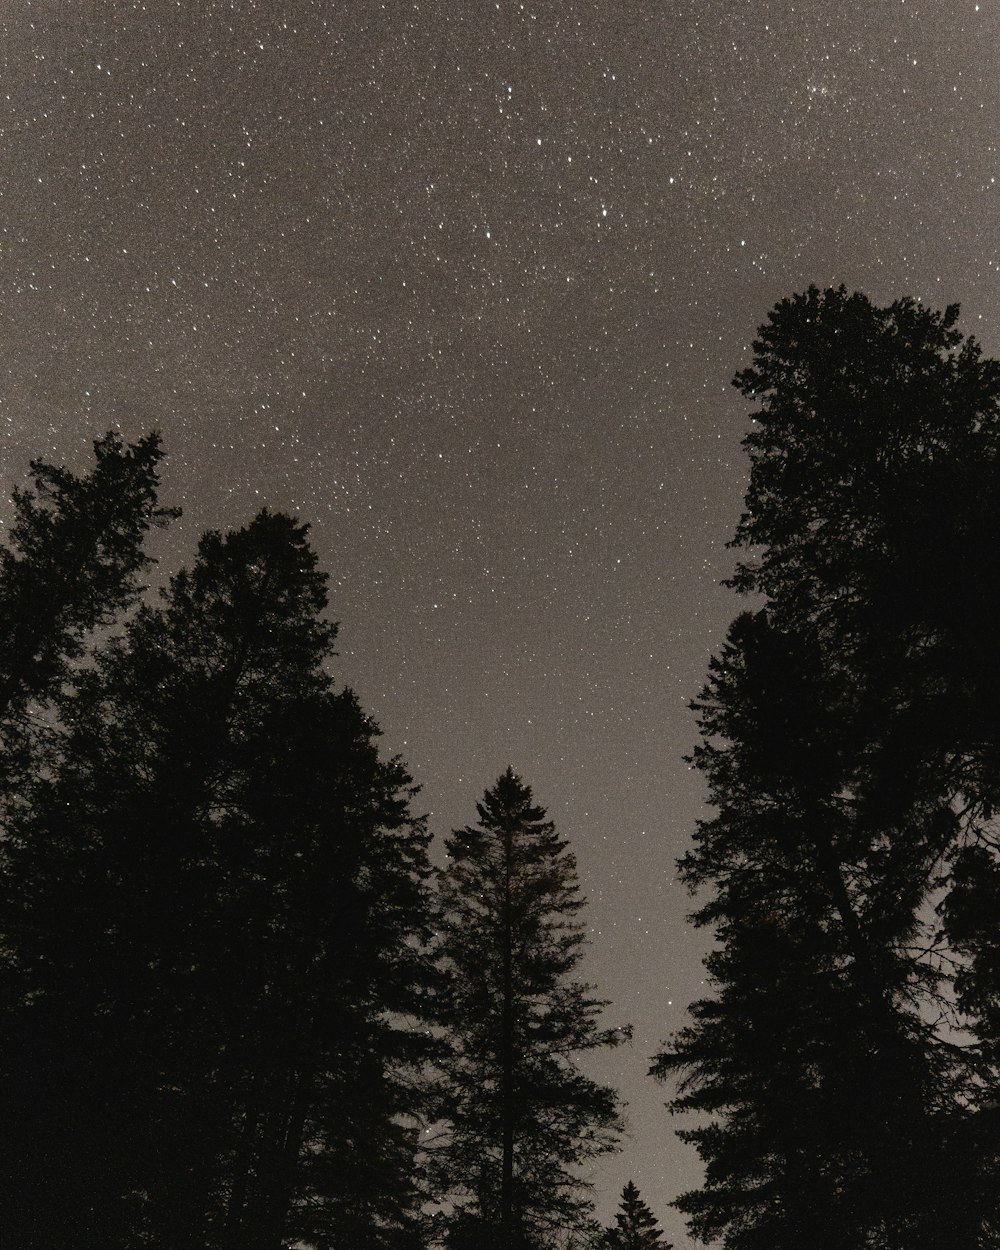 low-angle grayscale photography of trees under a starry sky during nighttime